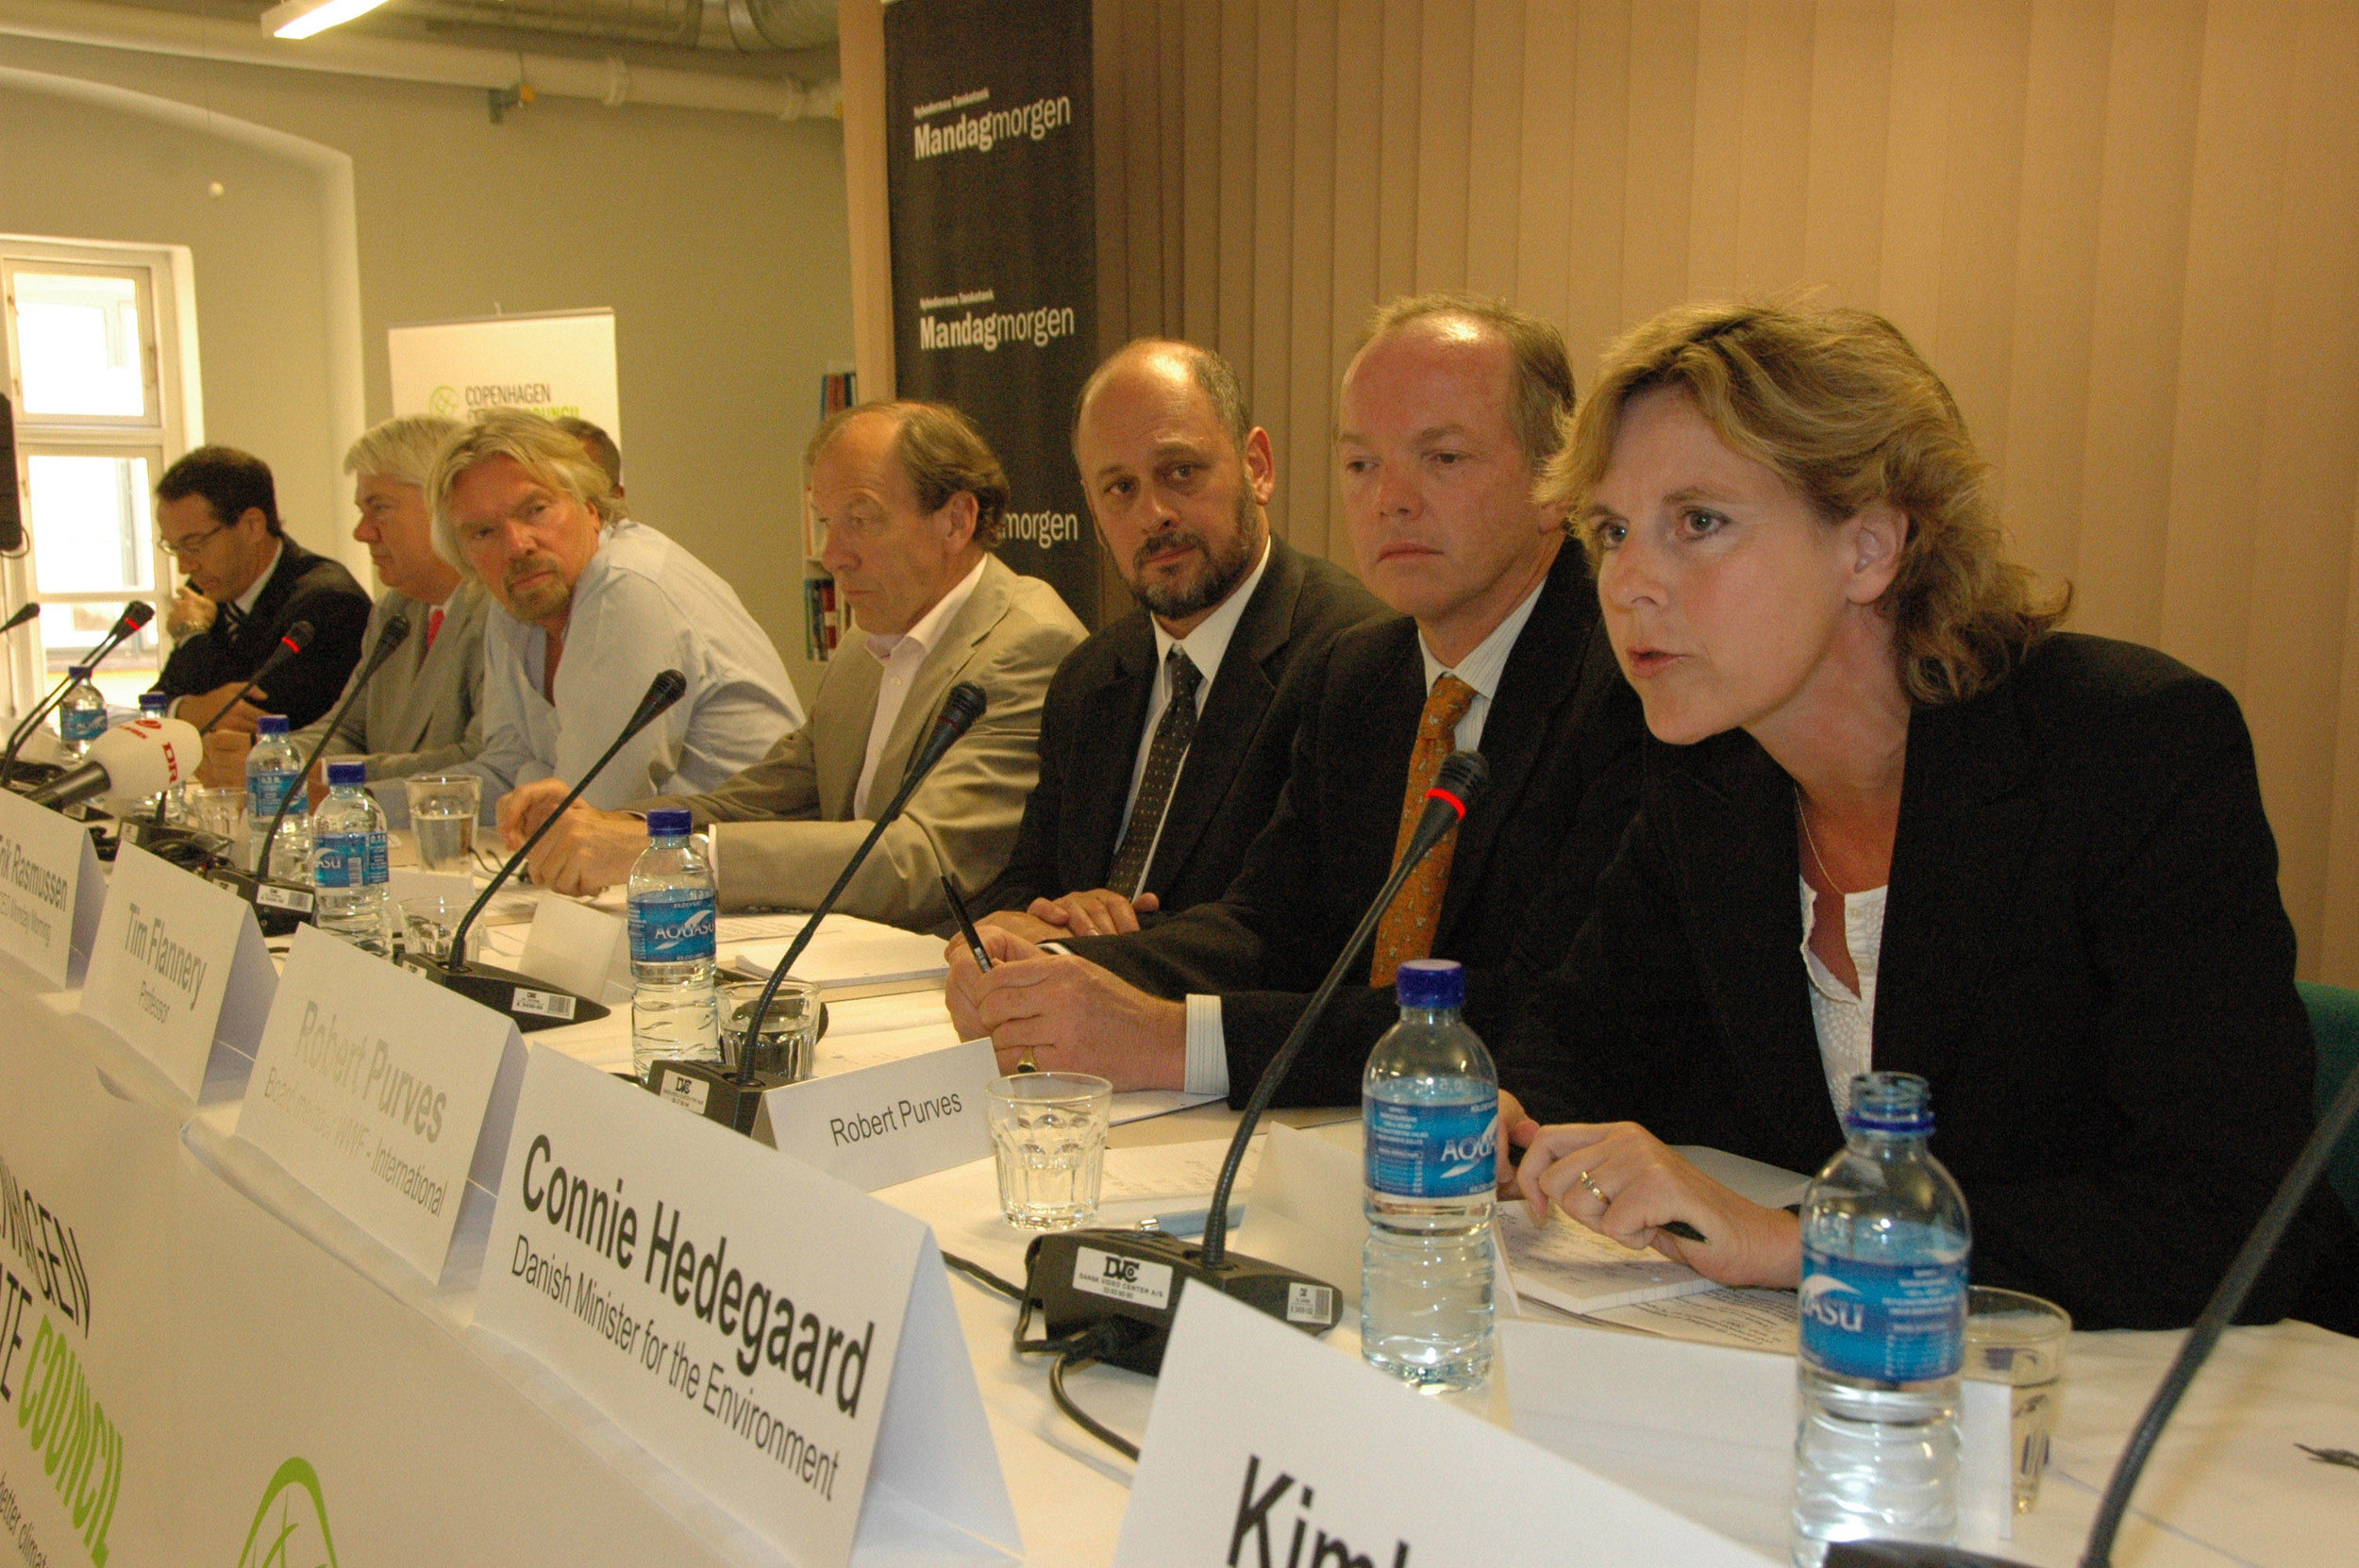 First Pressconference launching the Copenhagen Climate Council, May 2007